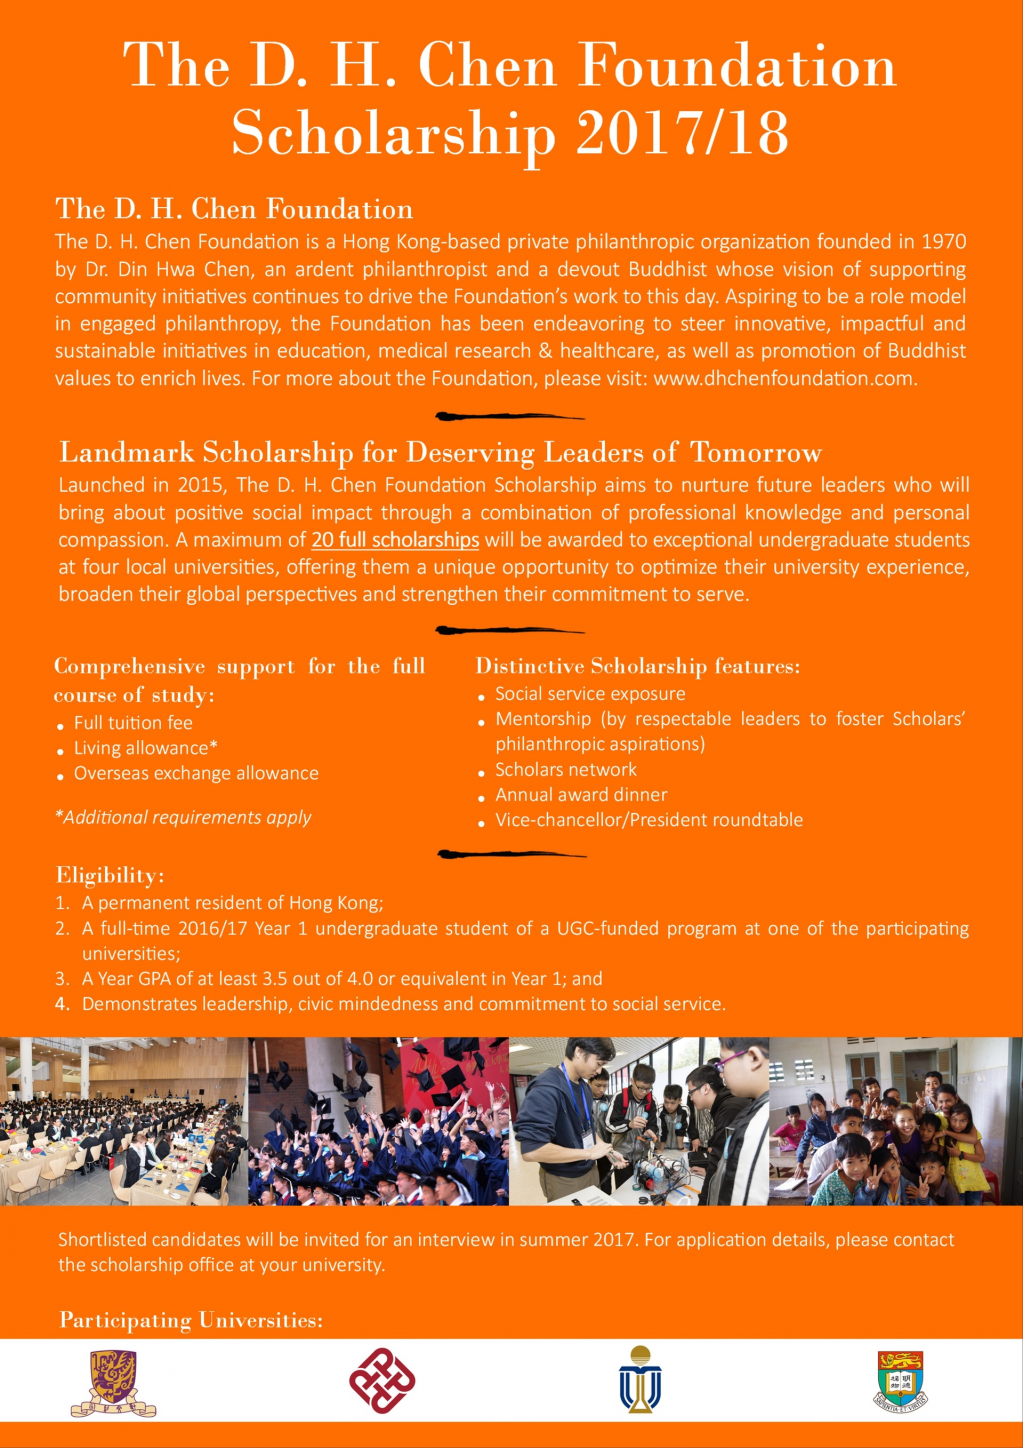 The D. H. Chen Foundation Scholarship for local Year 1 UG students - Information Session at HKU on February 16